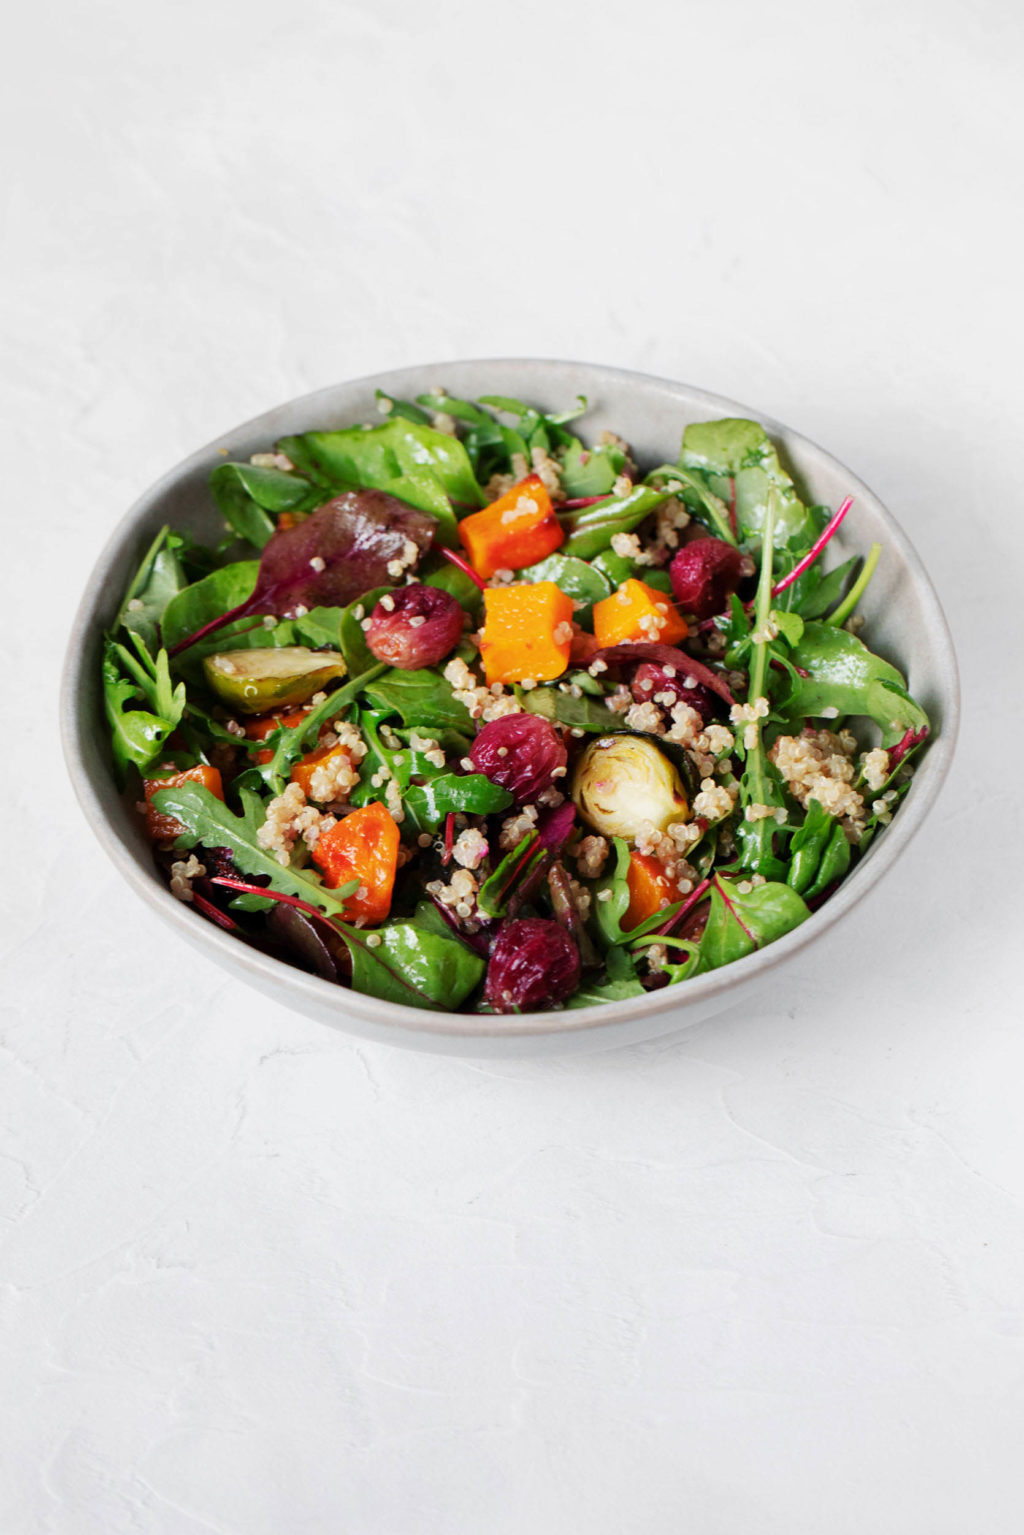 A round salad bowl, captured at a distance on a white surface, holds baby greens and cooked autumn vegetables.